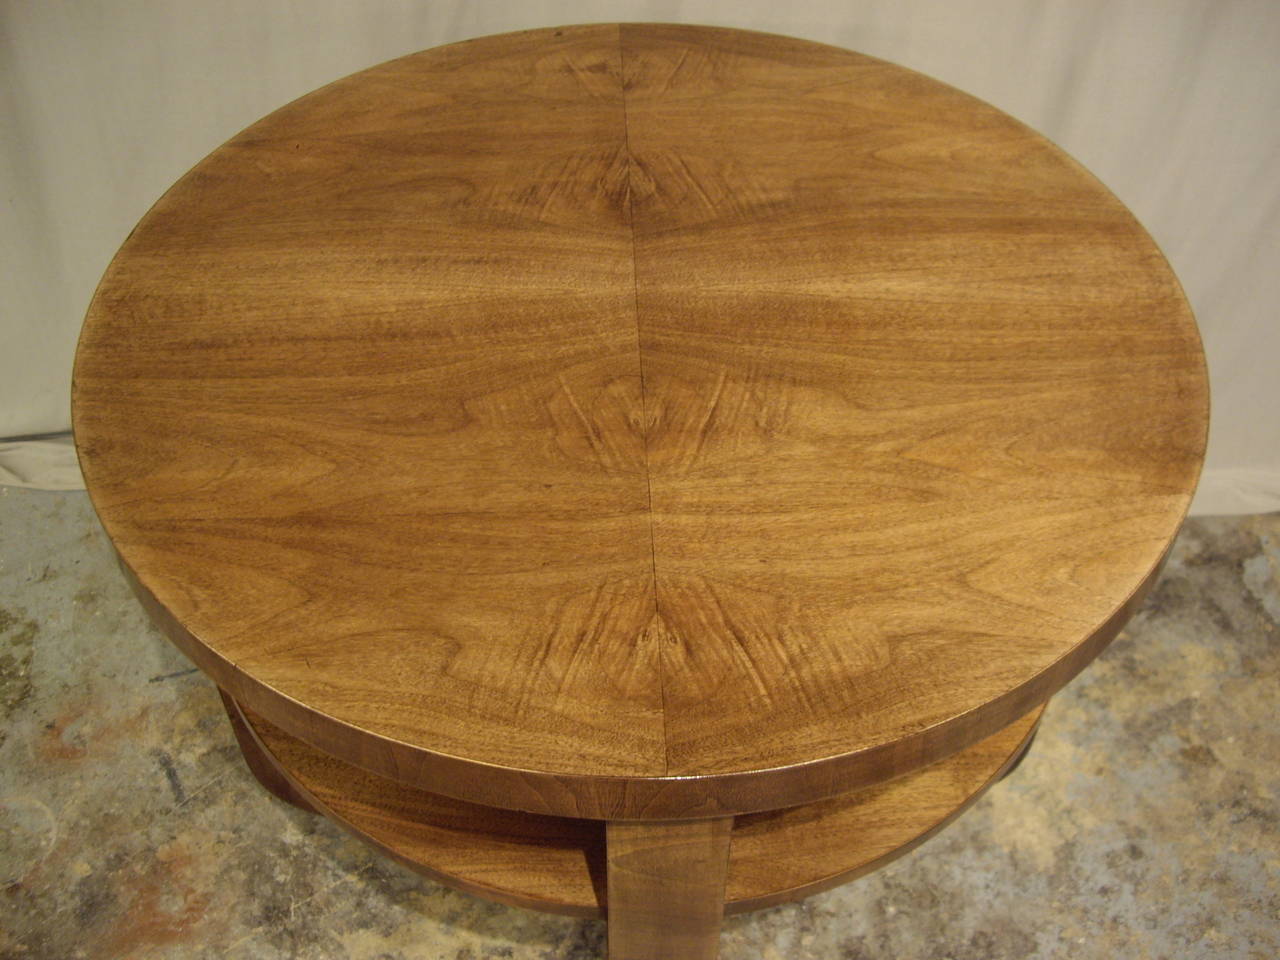 Elegant walnut French Art Deco round table. Can be used as a side table for sofa or pair of chairs or center hall table. Carefully restored and French polished.